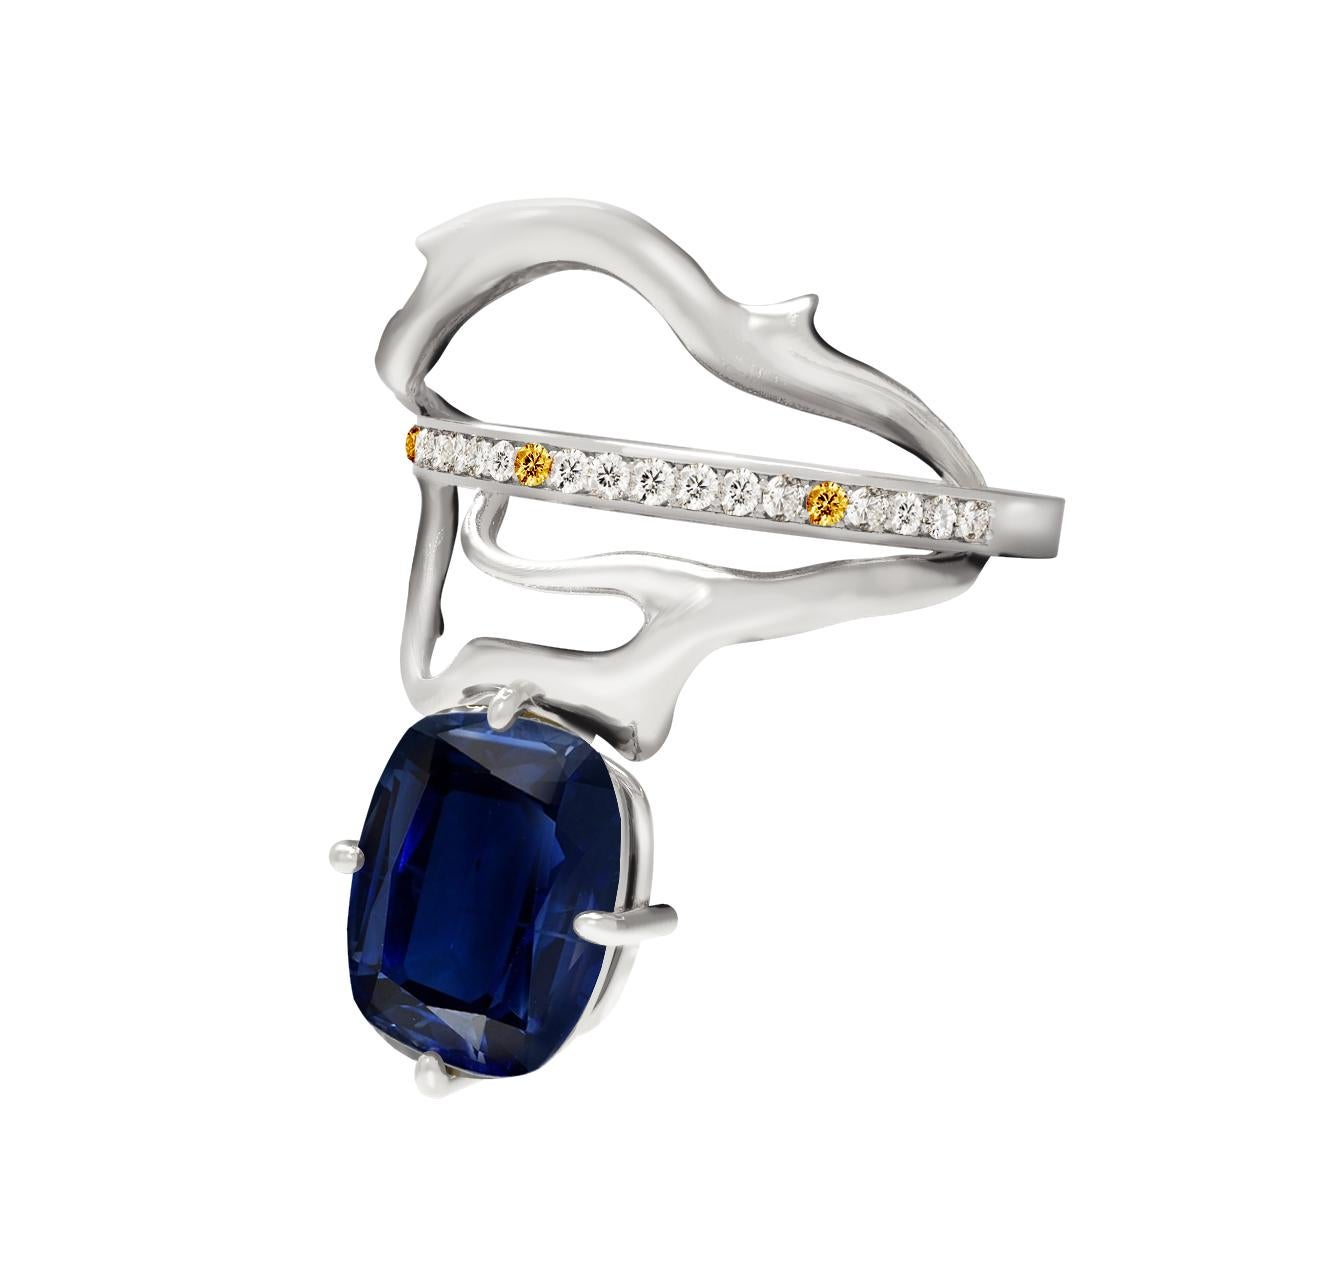 An unusual form makes this Tibetan 18 karat white gold contemporary pendant necklace an art object. It is encrusted with F/G, SI. diamonds, yellow sapphires, and big dark blue cushion sapphire (very dark blue). It was inspired by Tibetan culture,